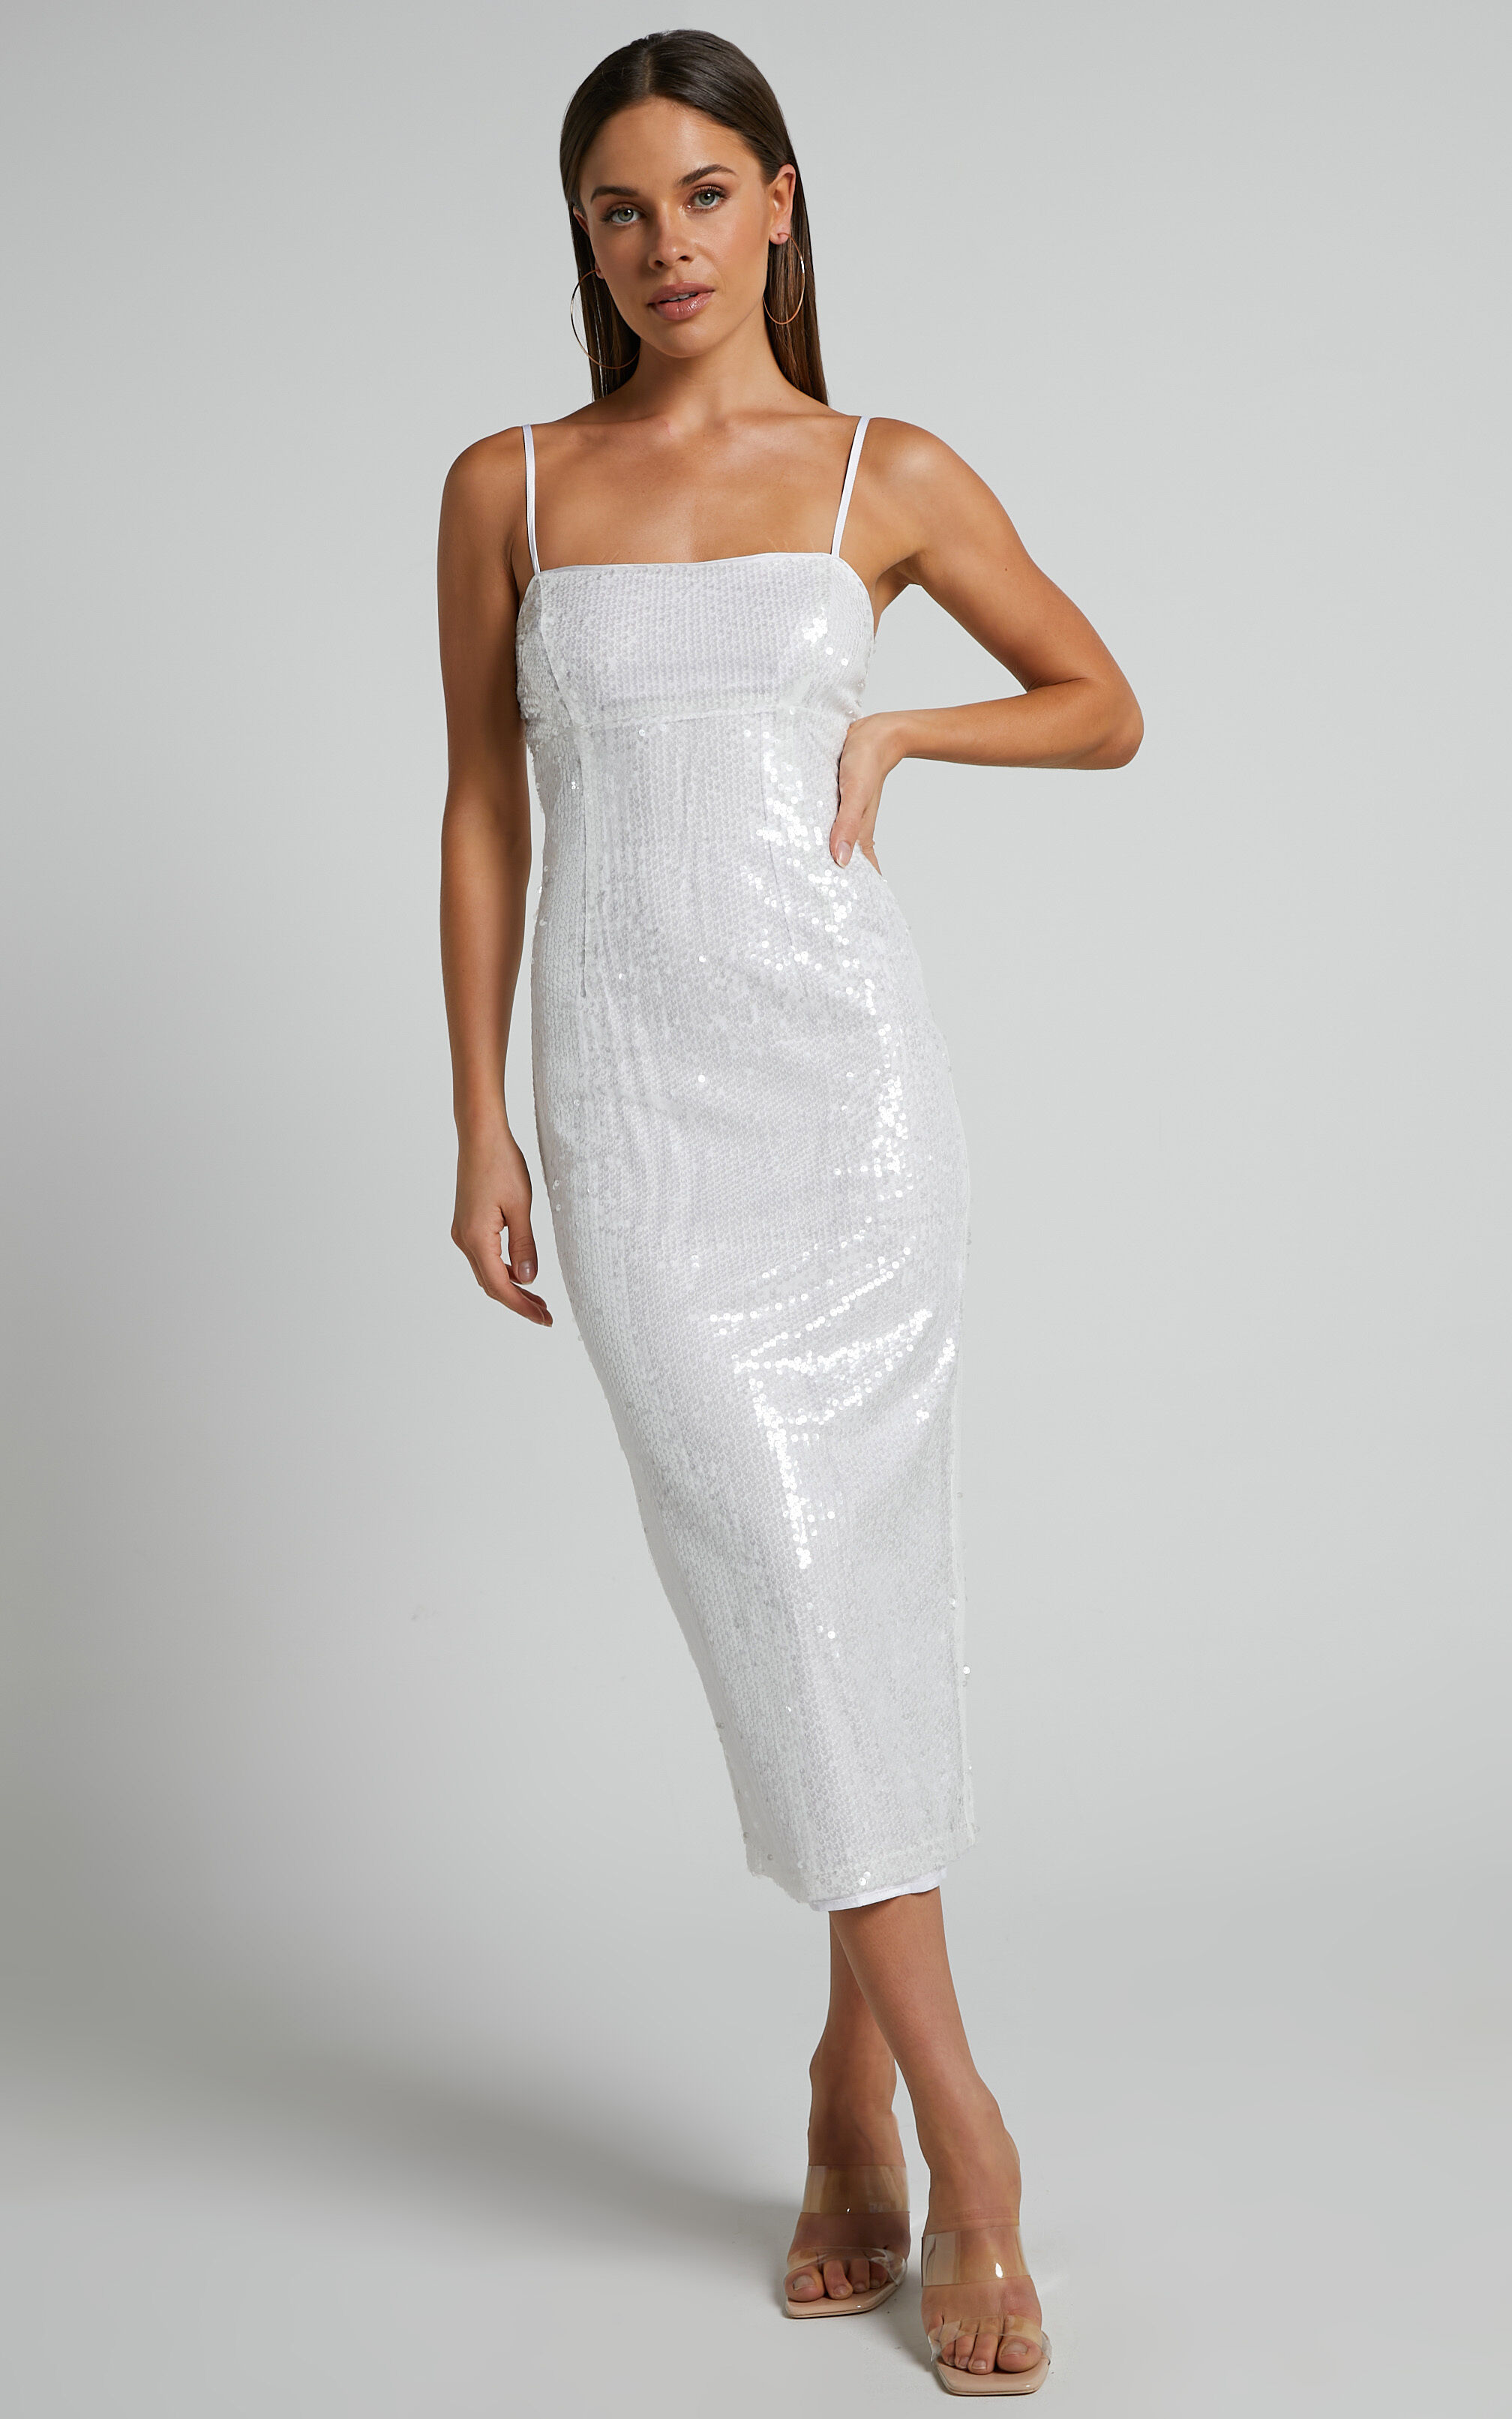 Gween Clear Sequin Sheer Midi Dress in White - 06, WHT1, super-hi-res image number null